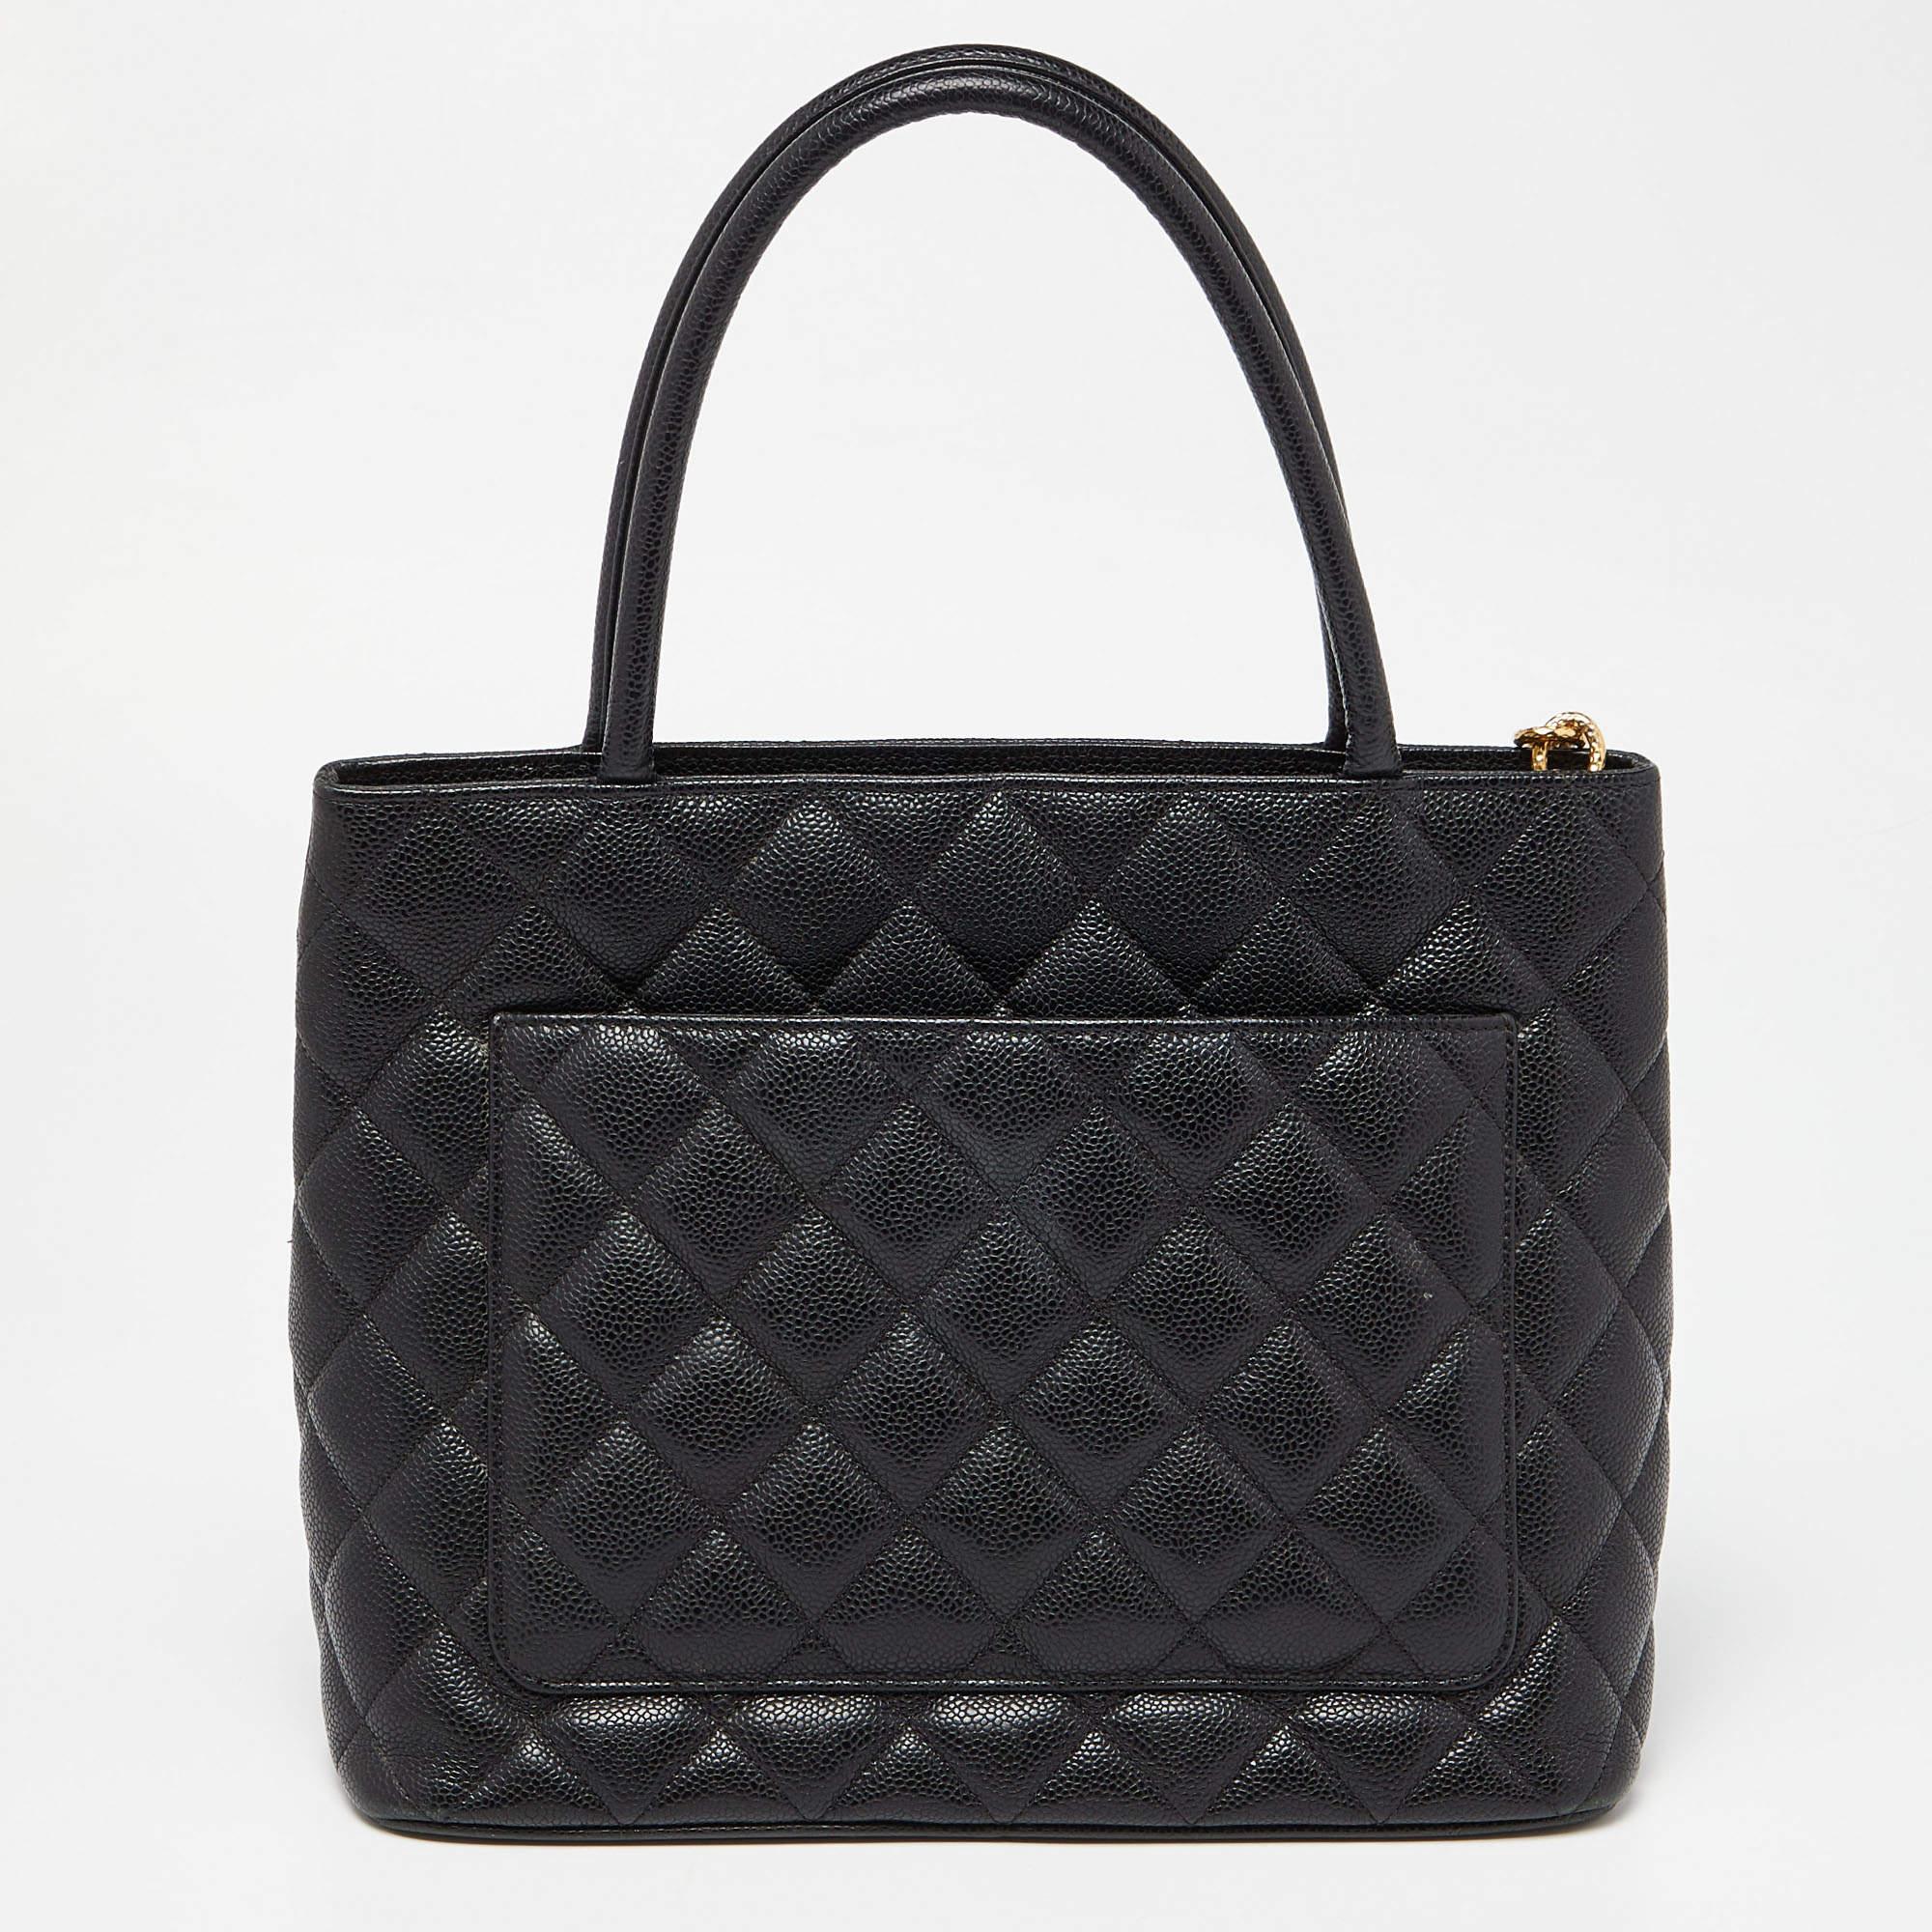 Chanel Black Quilted Caviar Leather Medallion Bag 6